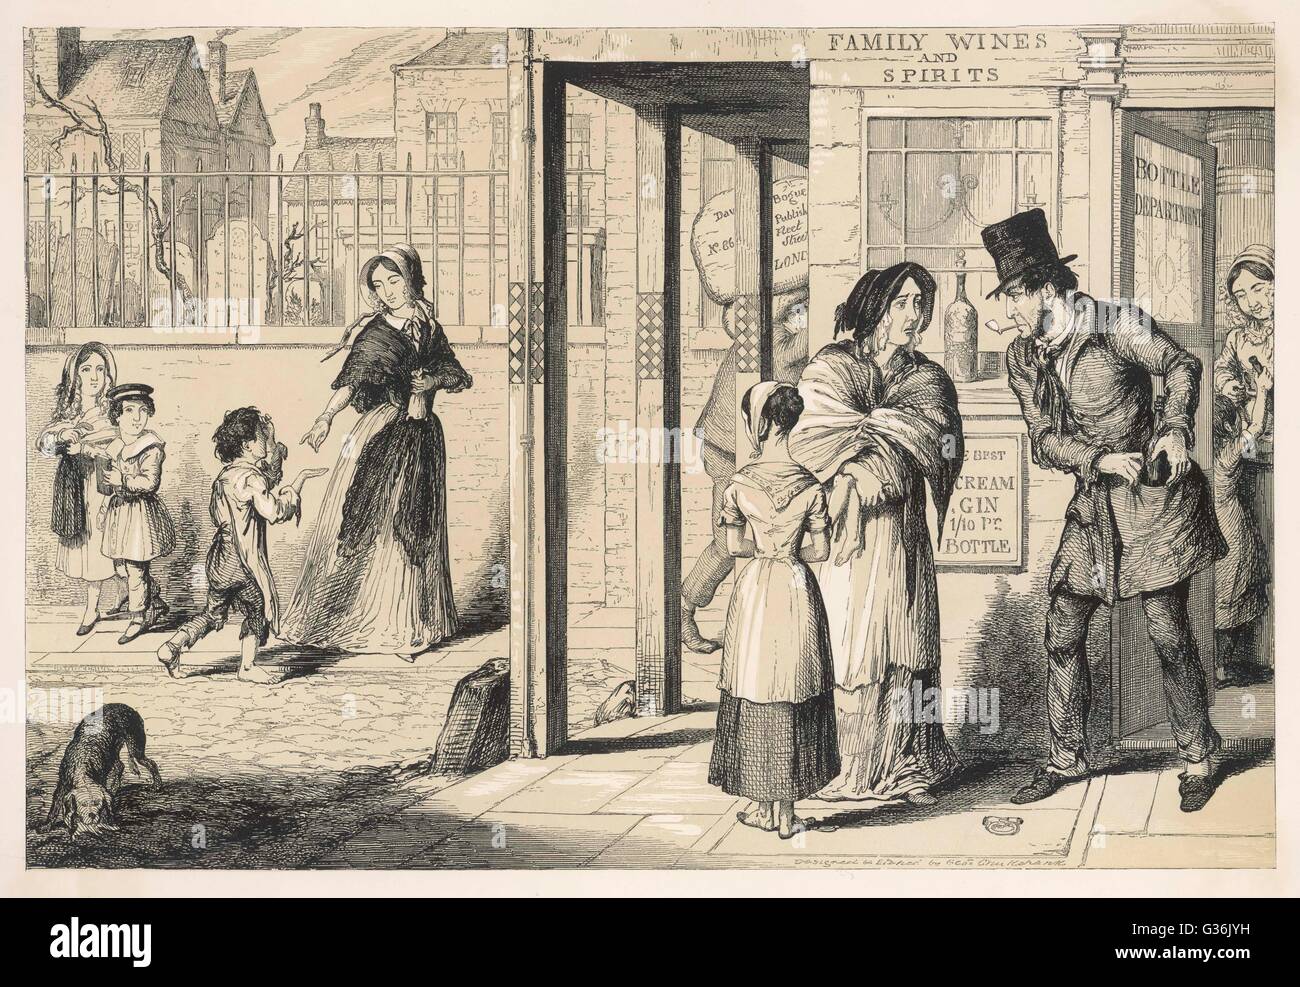 The Bottle, scene 4    The boy begs in the street,  the girl goes barefoot, to pay for The Bottle.      Date: 1847 Stock Photo